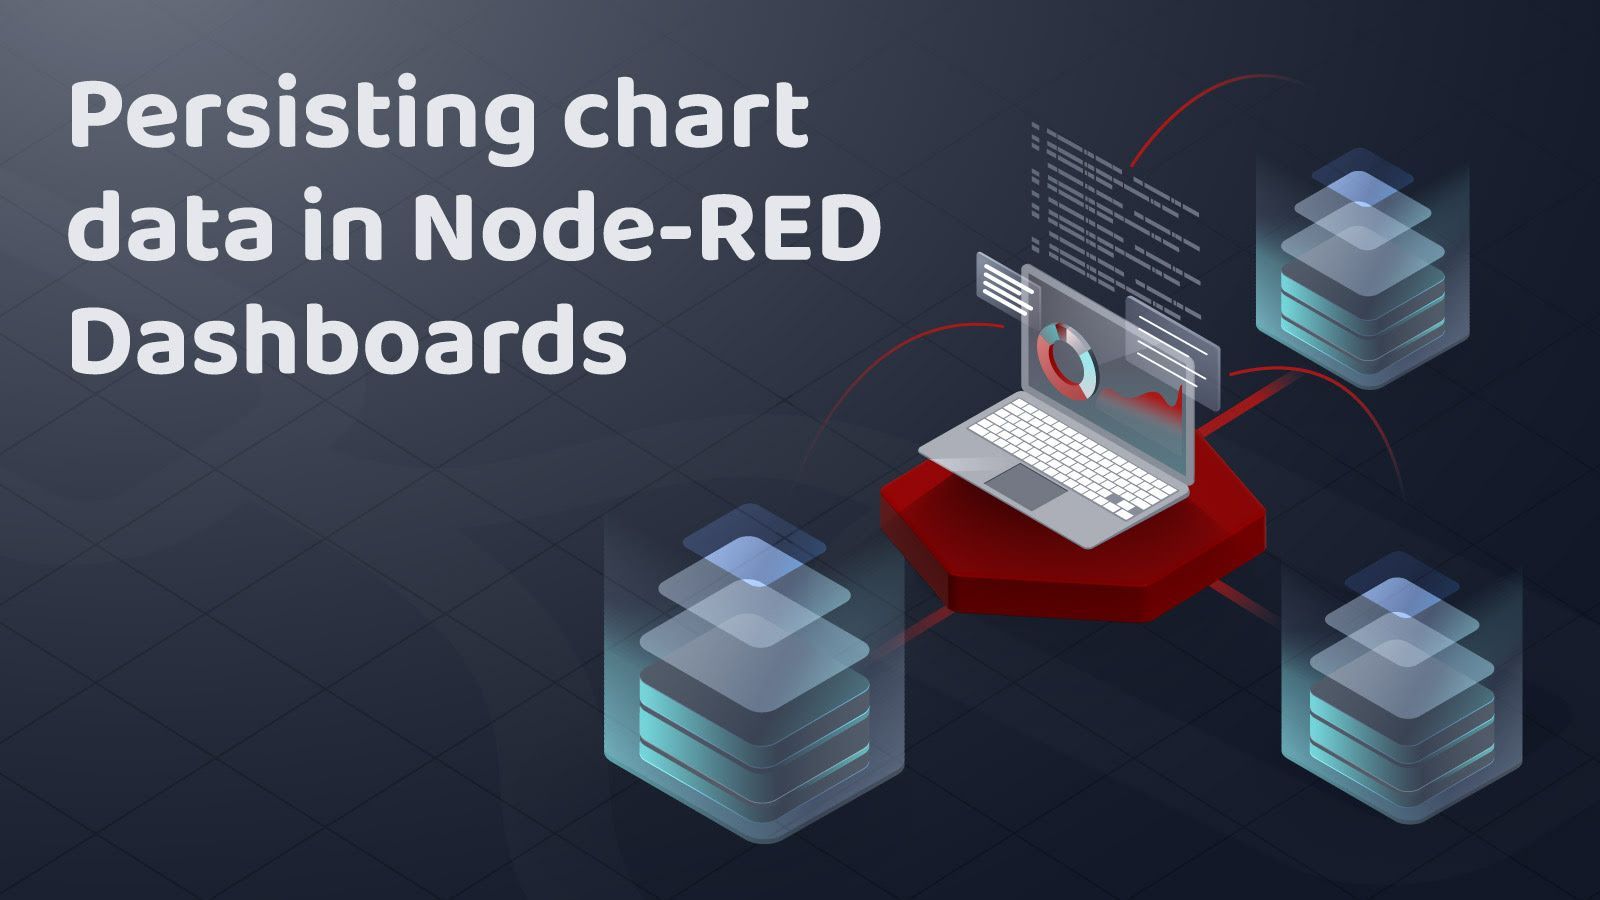 Image representing Persisting chart data in Node-RED Dashboards